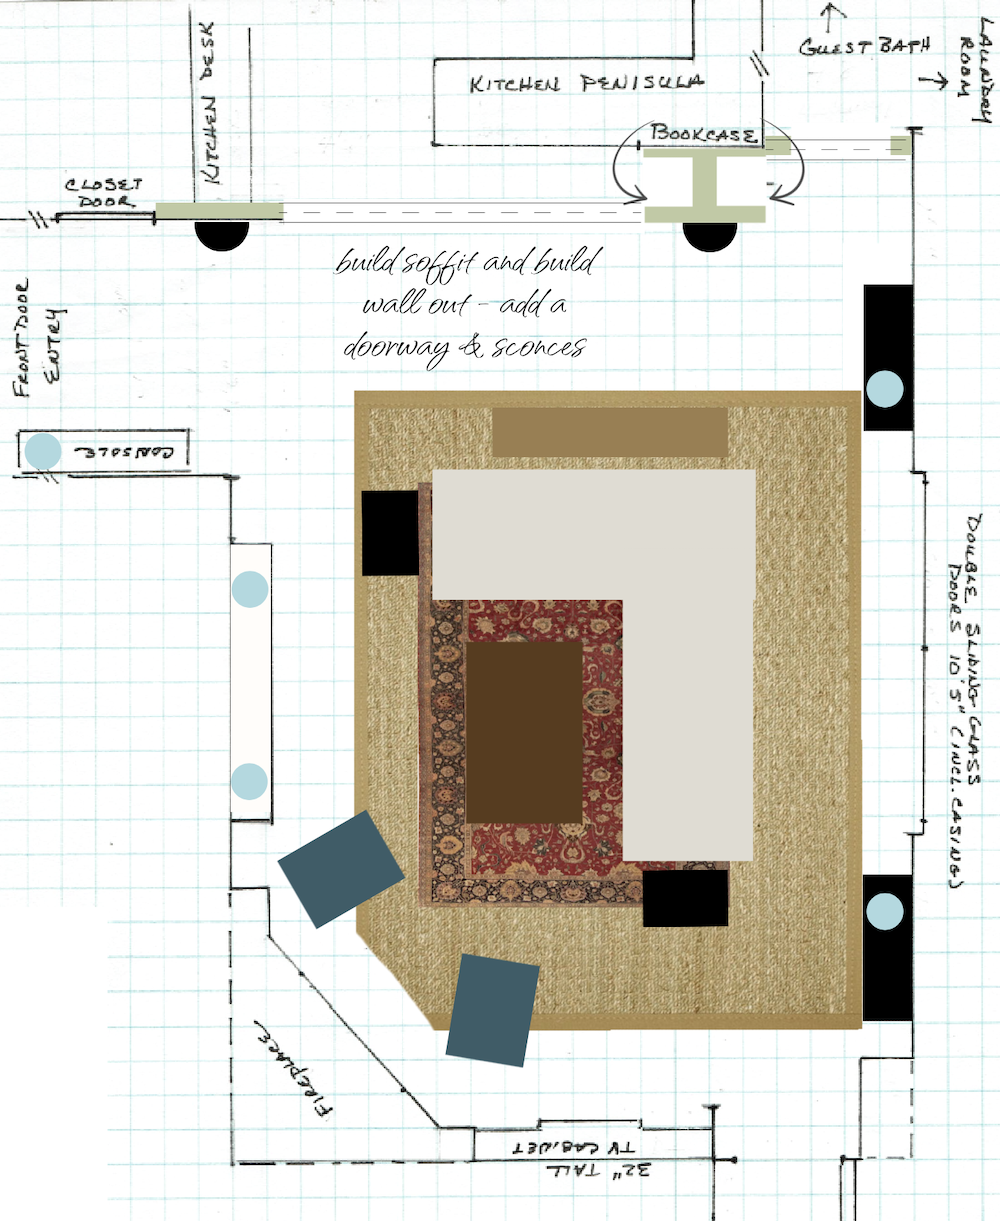 Mary's floorplan revised with seagrass rug, slipper chairs, opium coffee table, end tables and walls